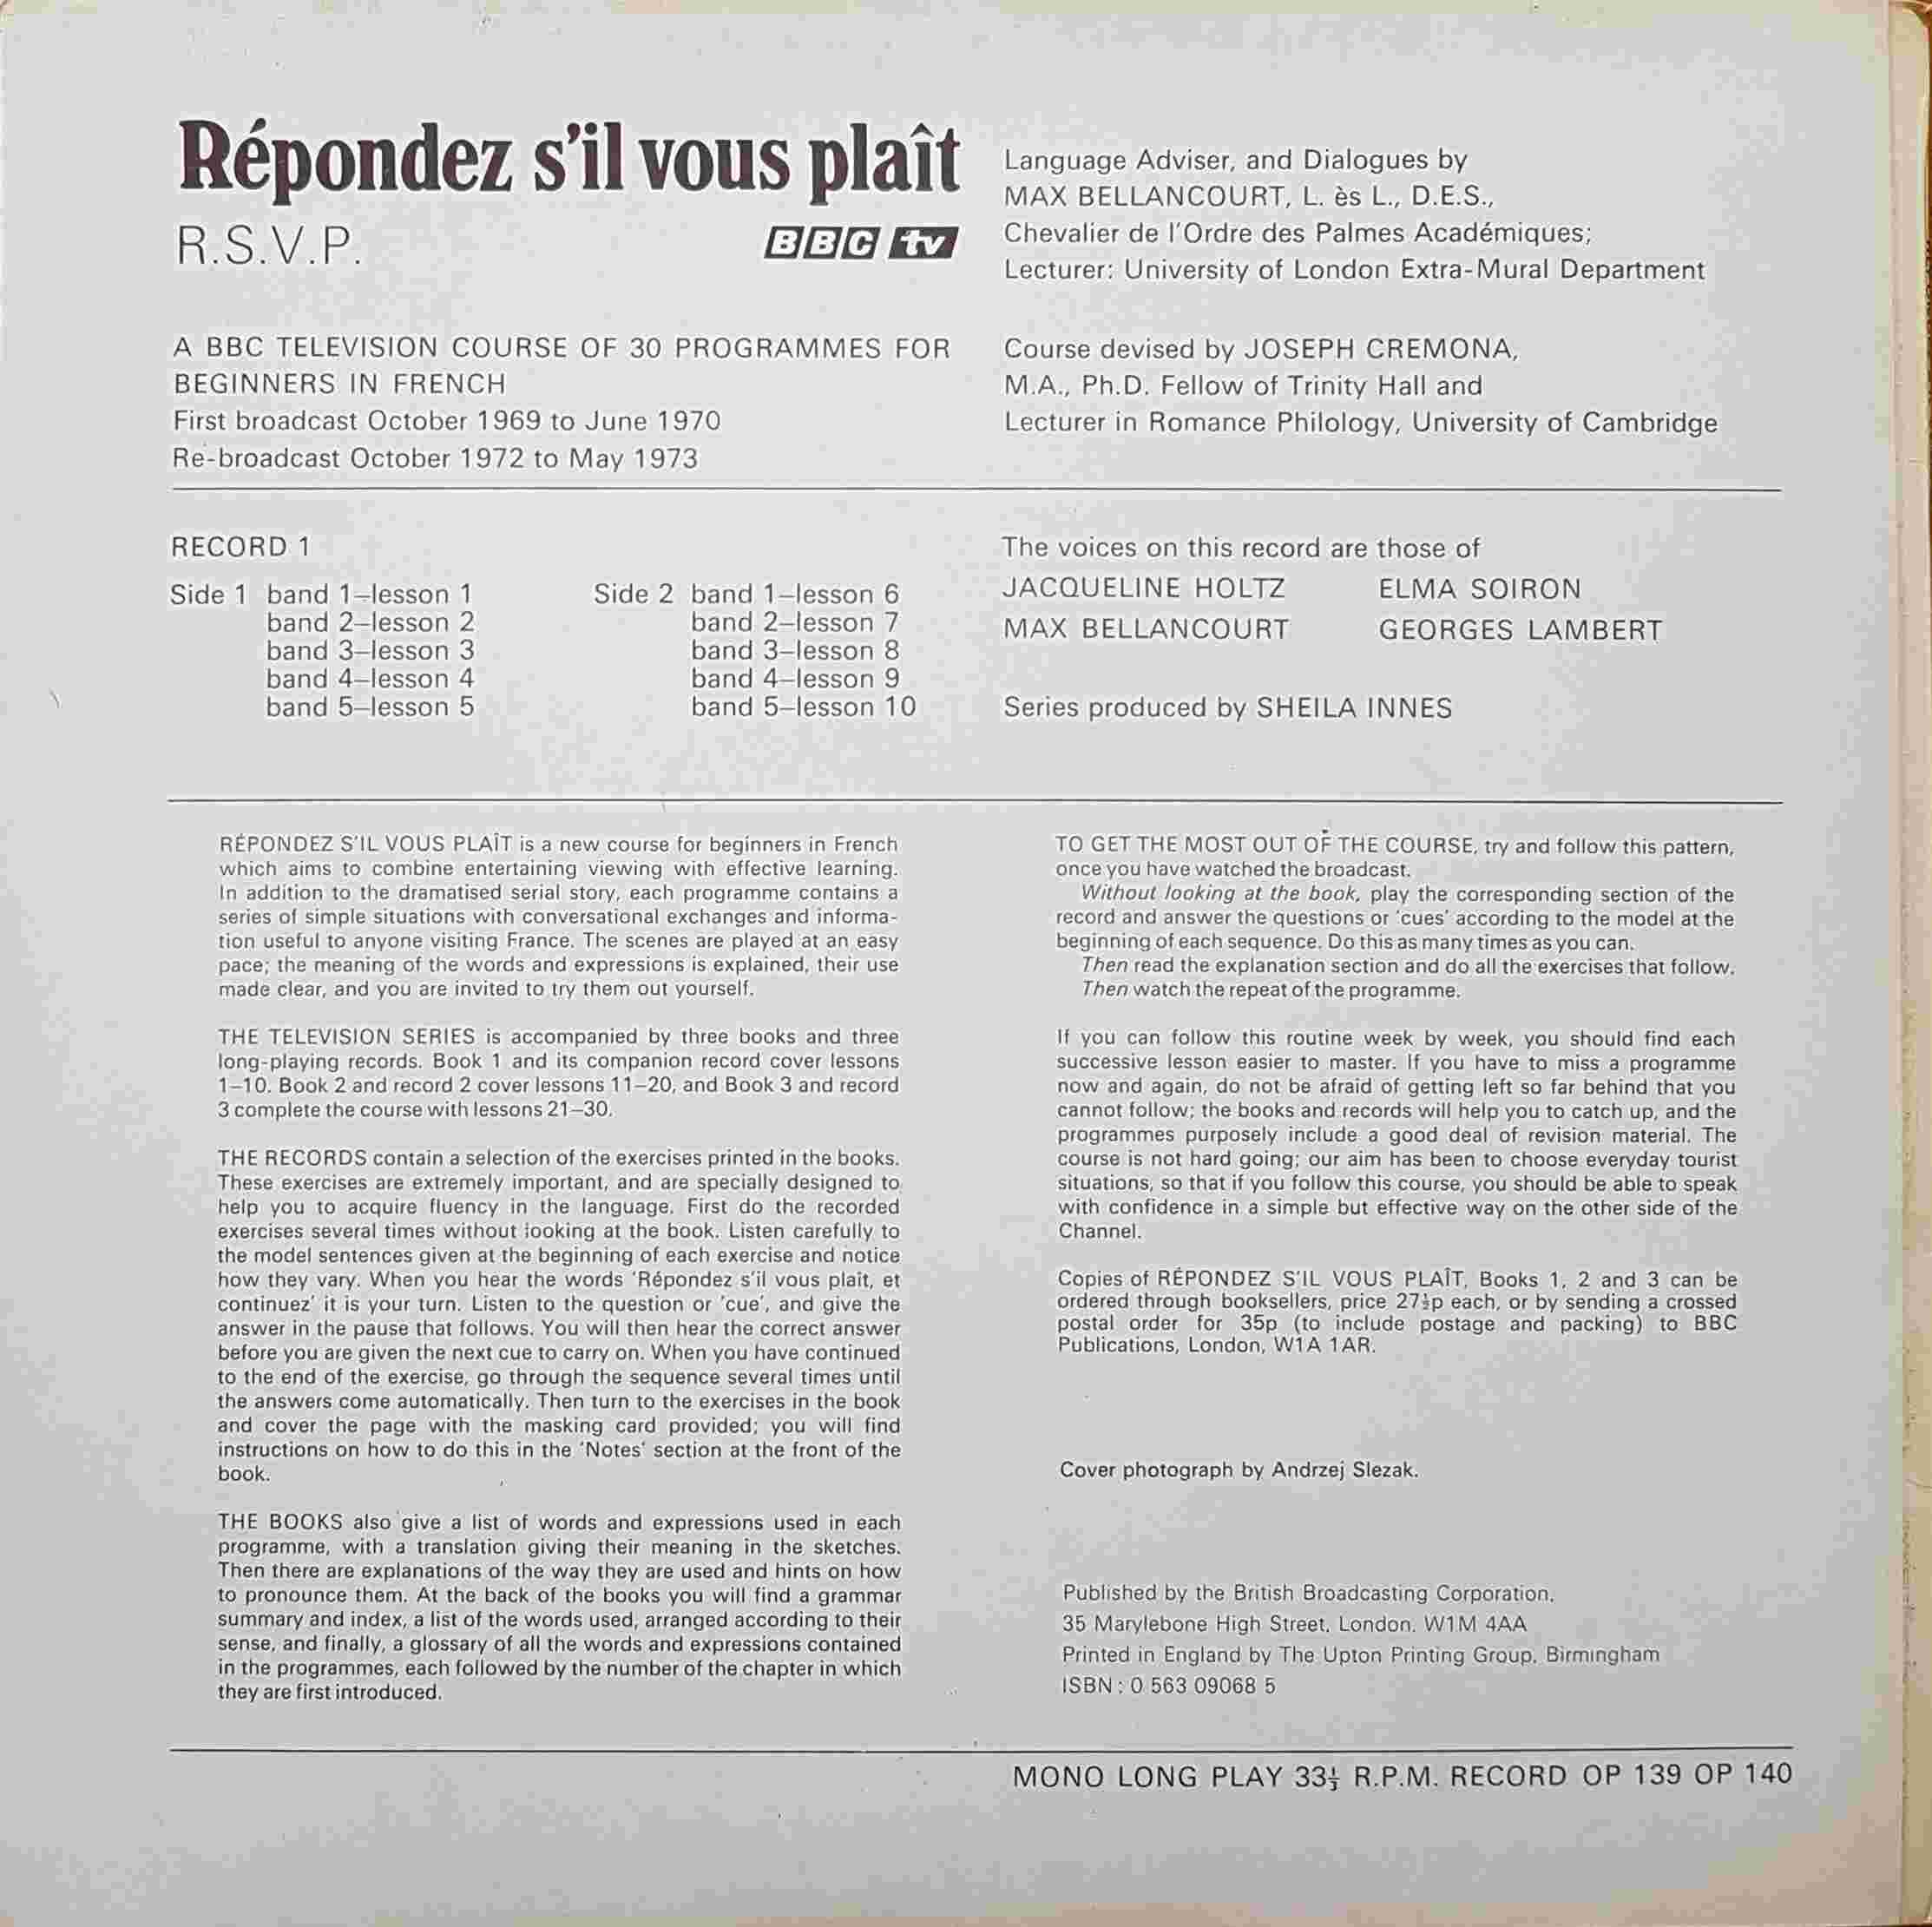 Picture of OP 139/140 Respondez s'il vous plait R. S. V. P. - Lessons 1 - 10 by artist Max Bellancourt / Joseph Cremona from the BBC records and Tapes library